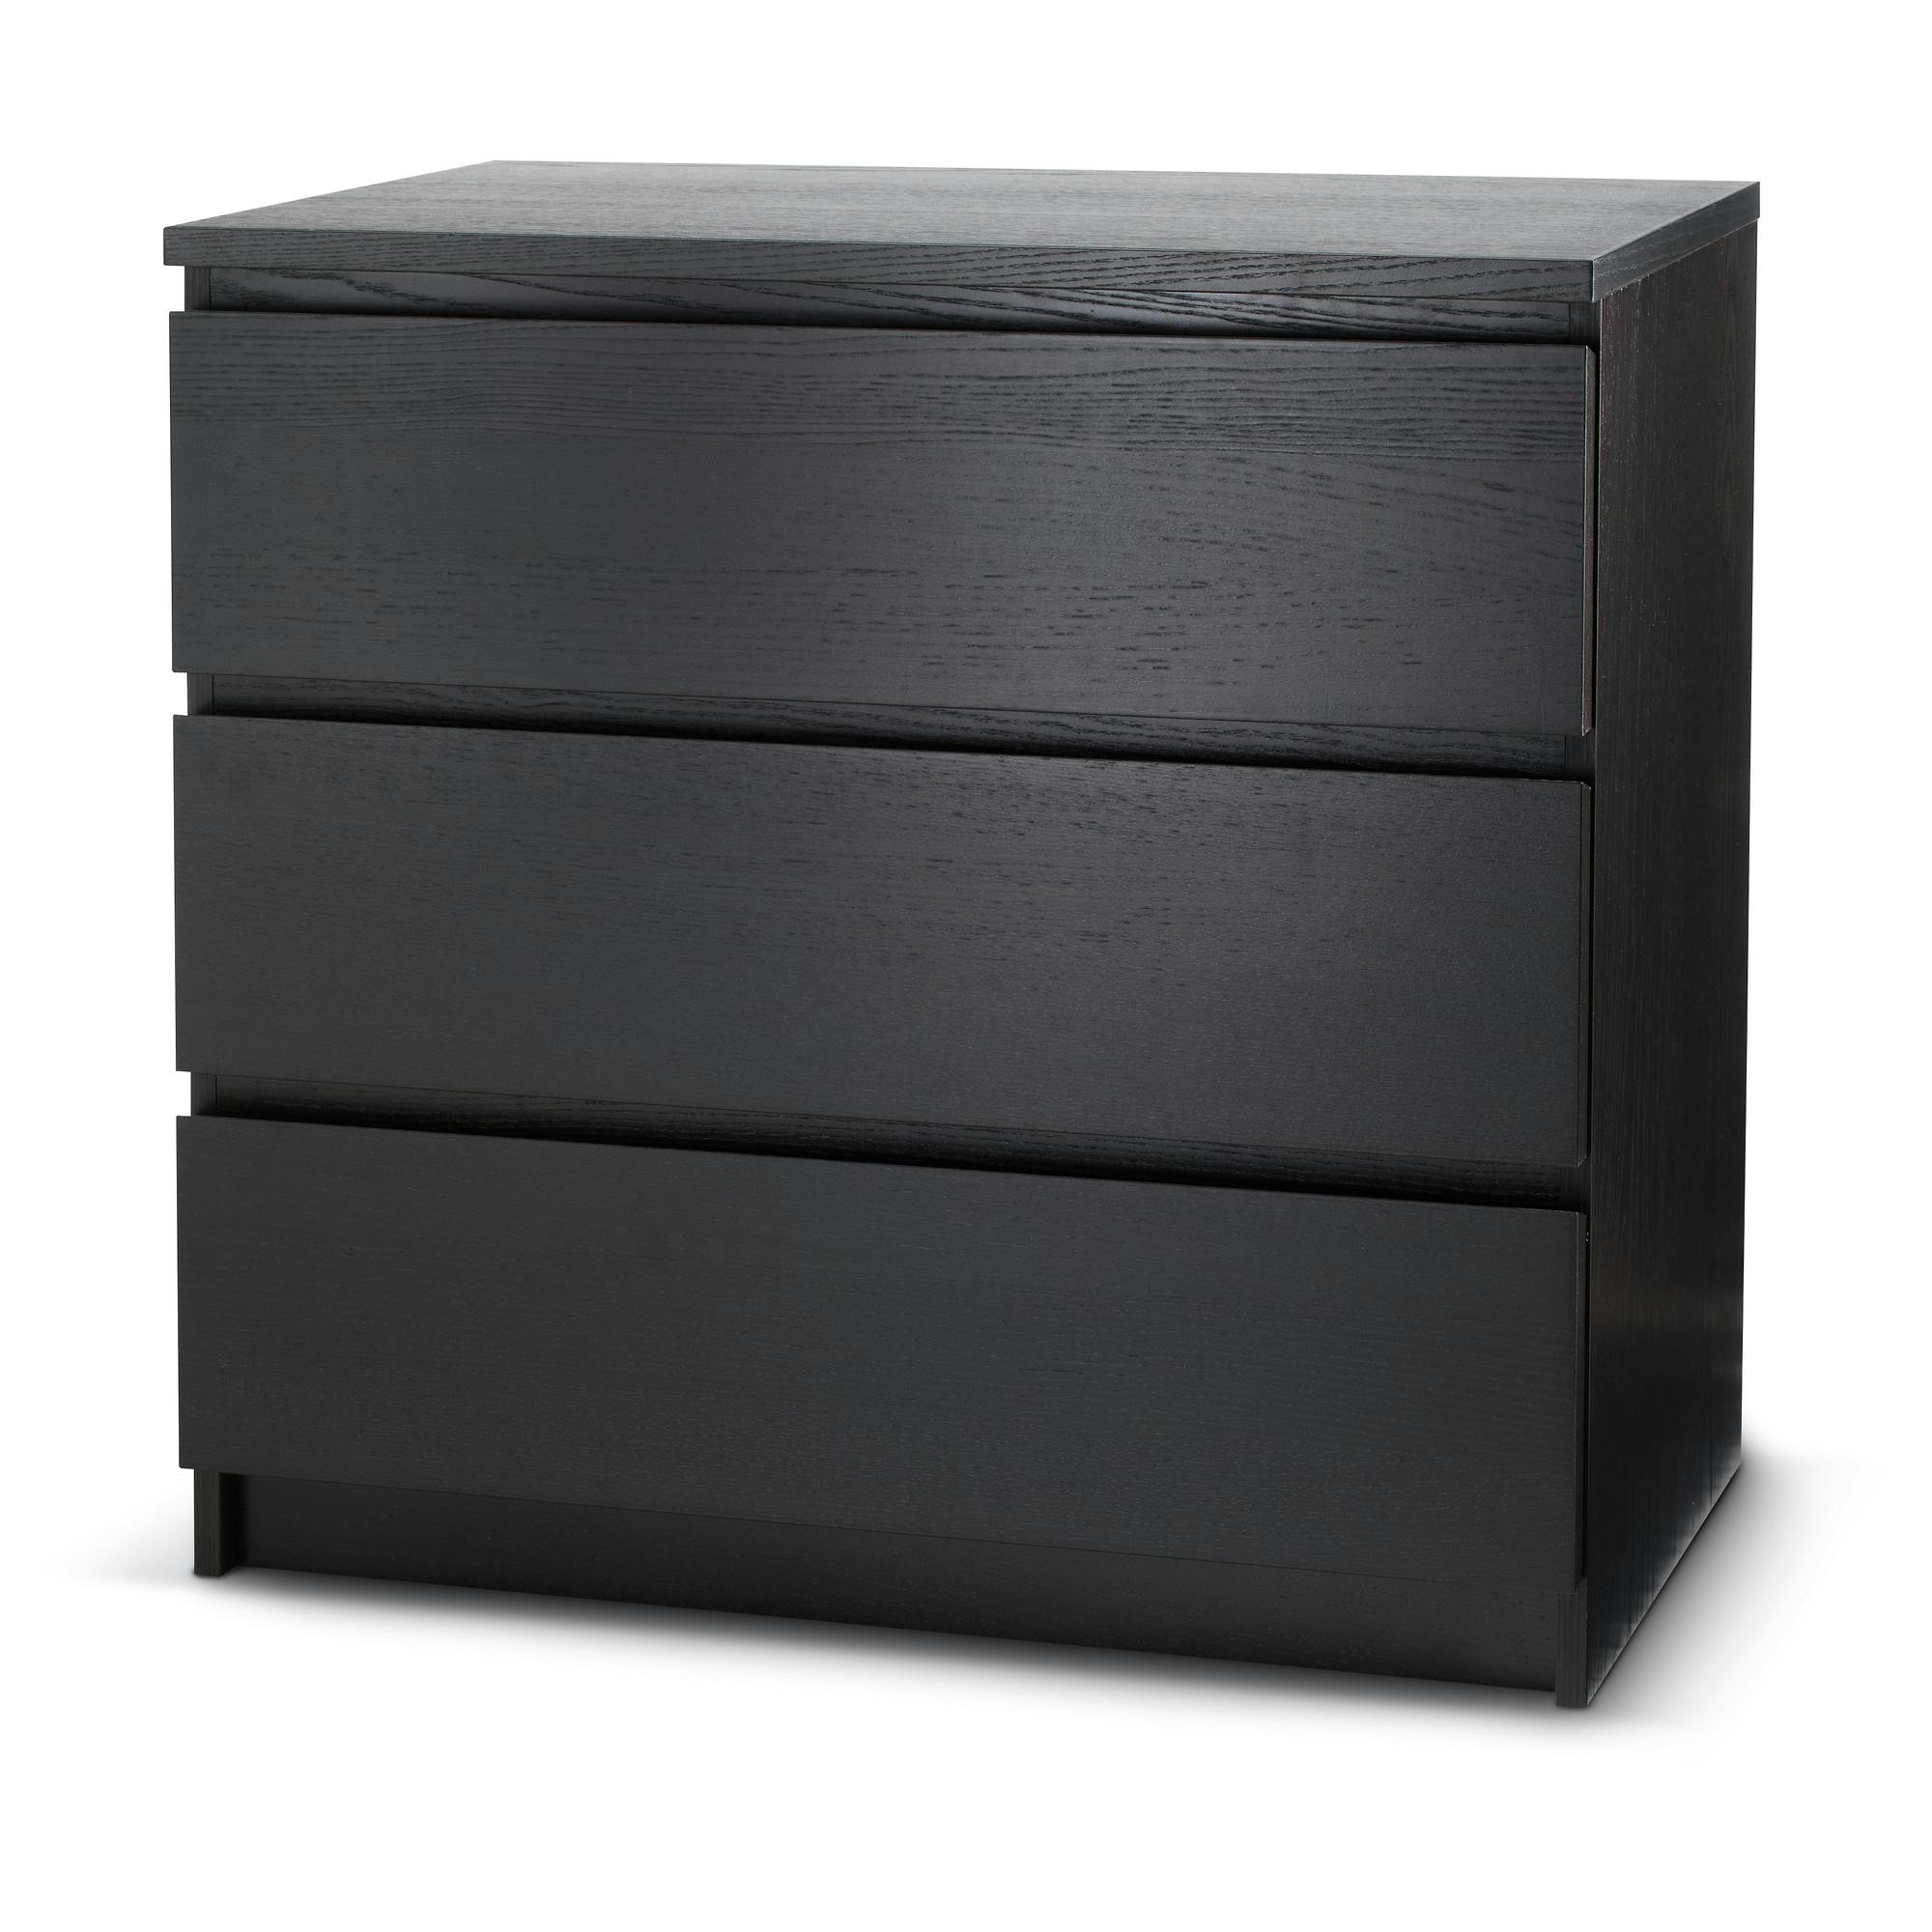 Ikea Recalls Over 35 Million Malm And Other Dressers And Chests